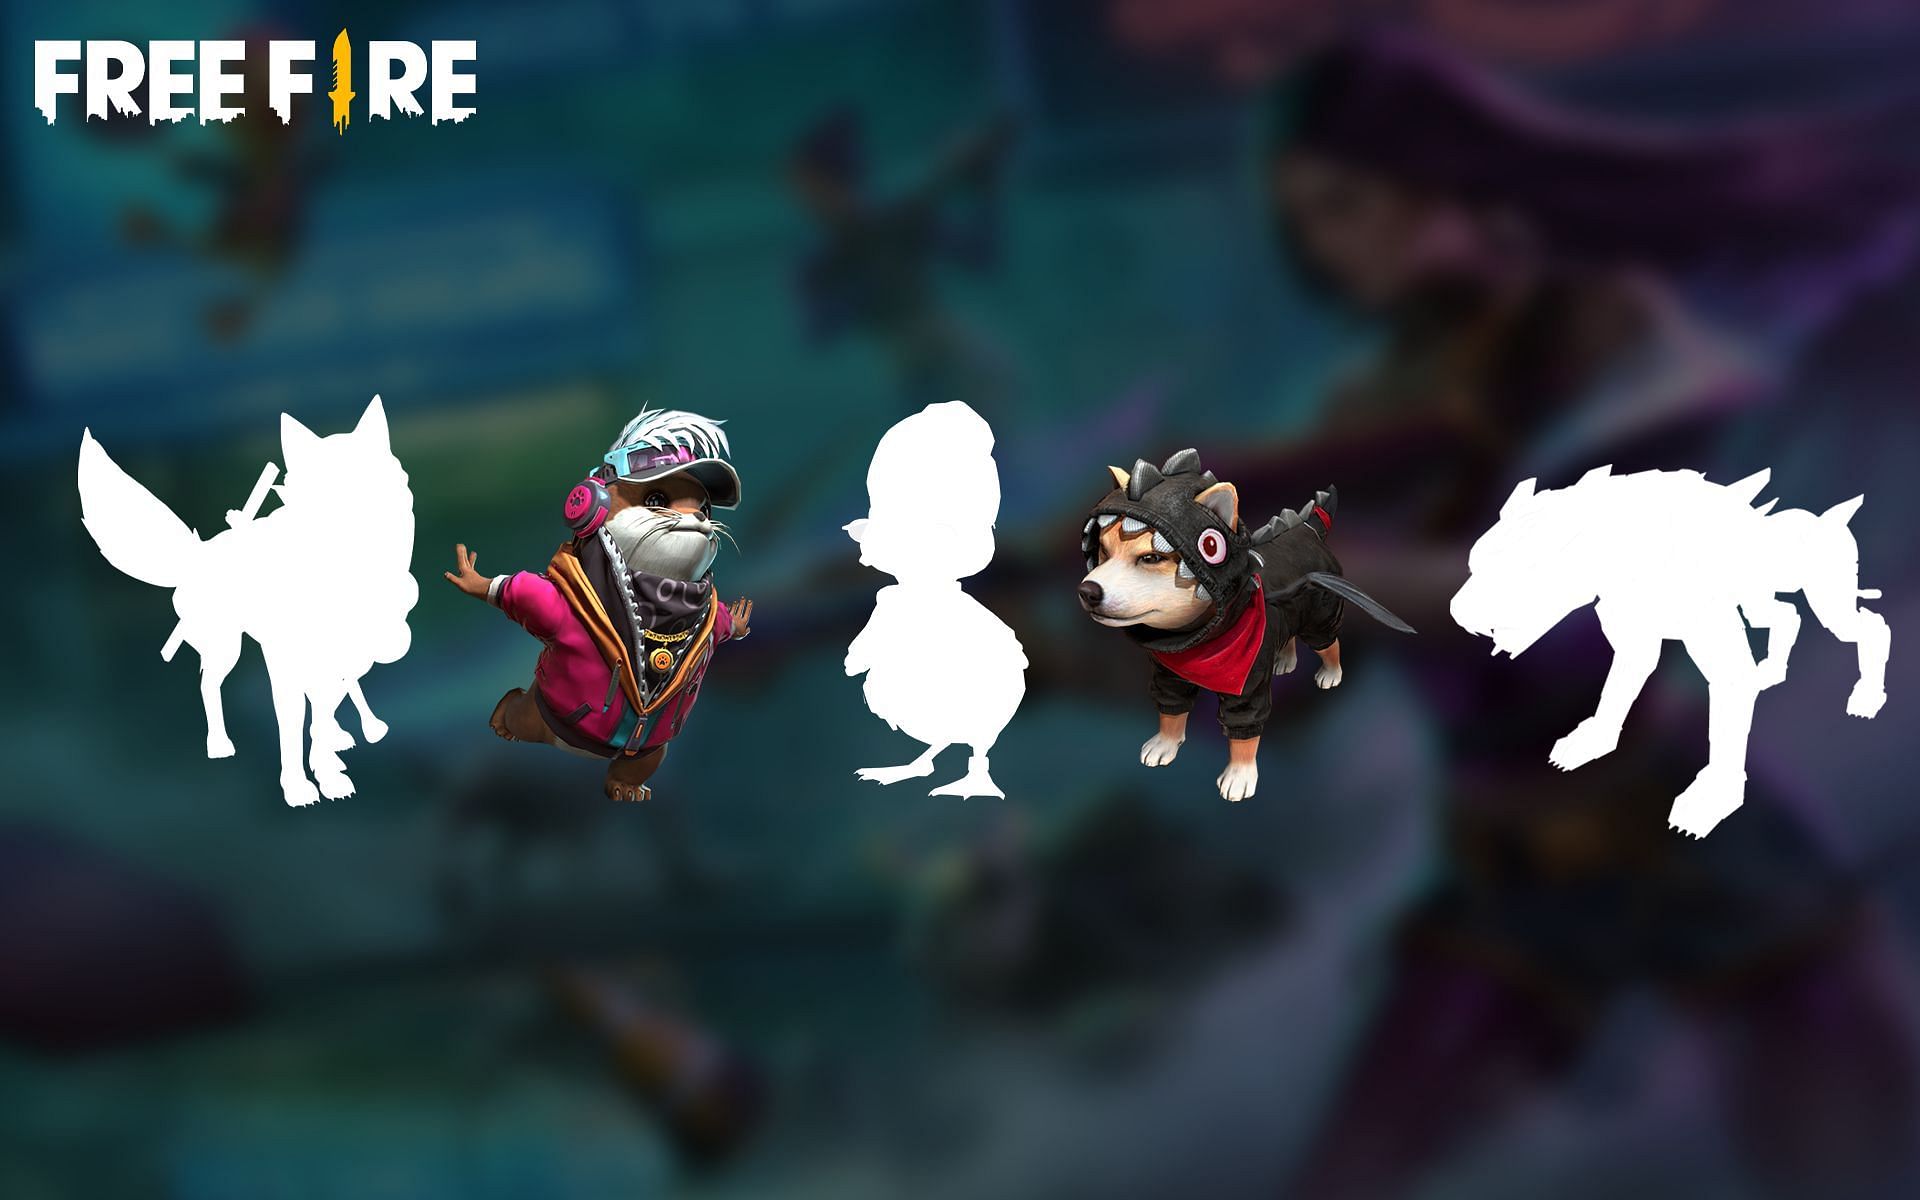 Use these pets to get the most out of a passive playstyle in Free Fire (Image via Sportskeeda)